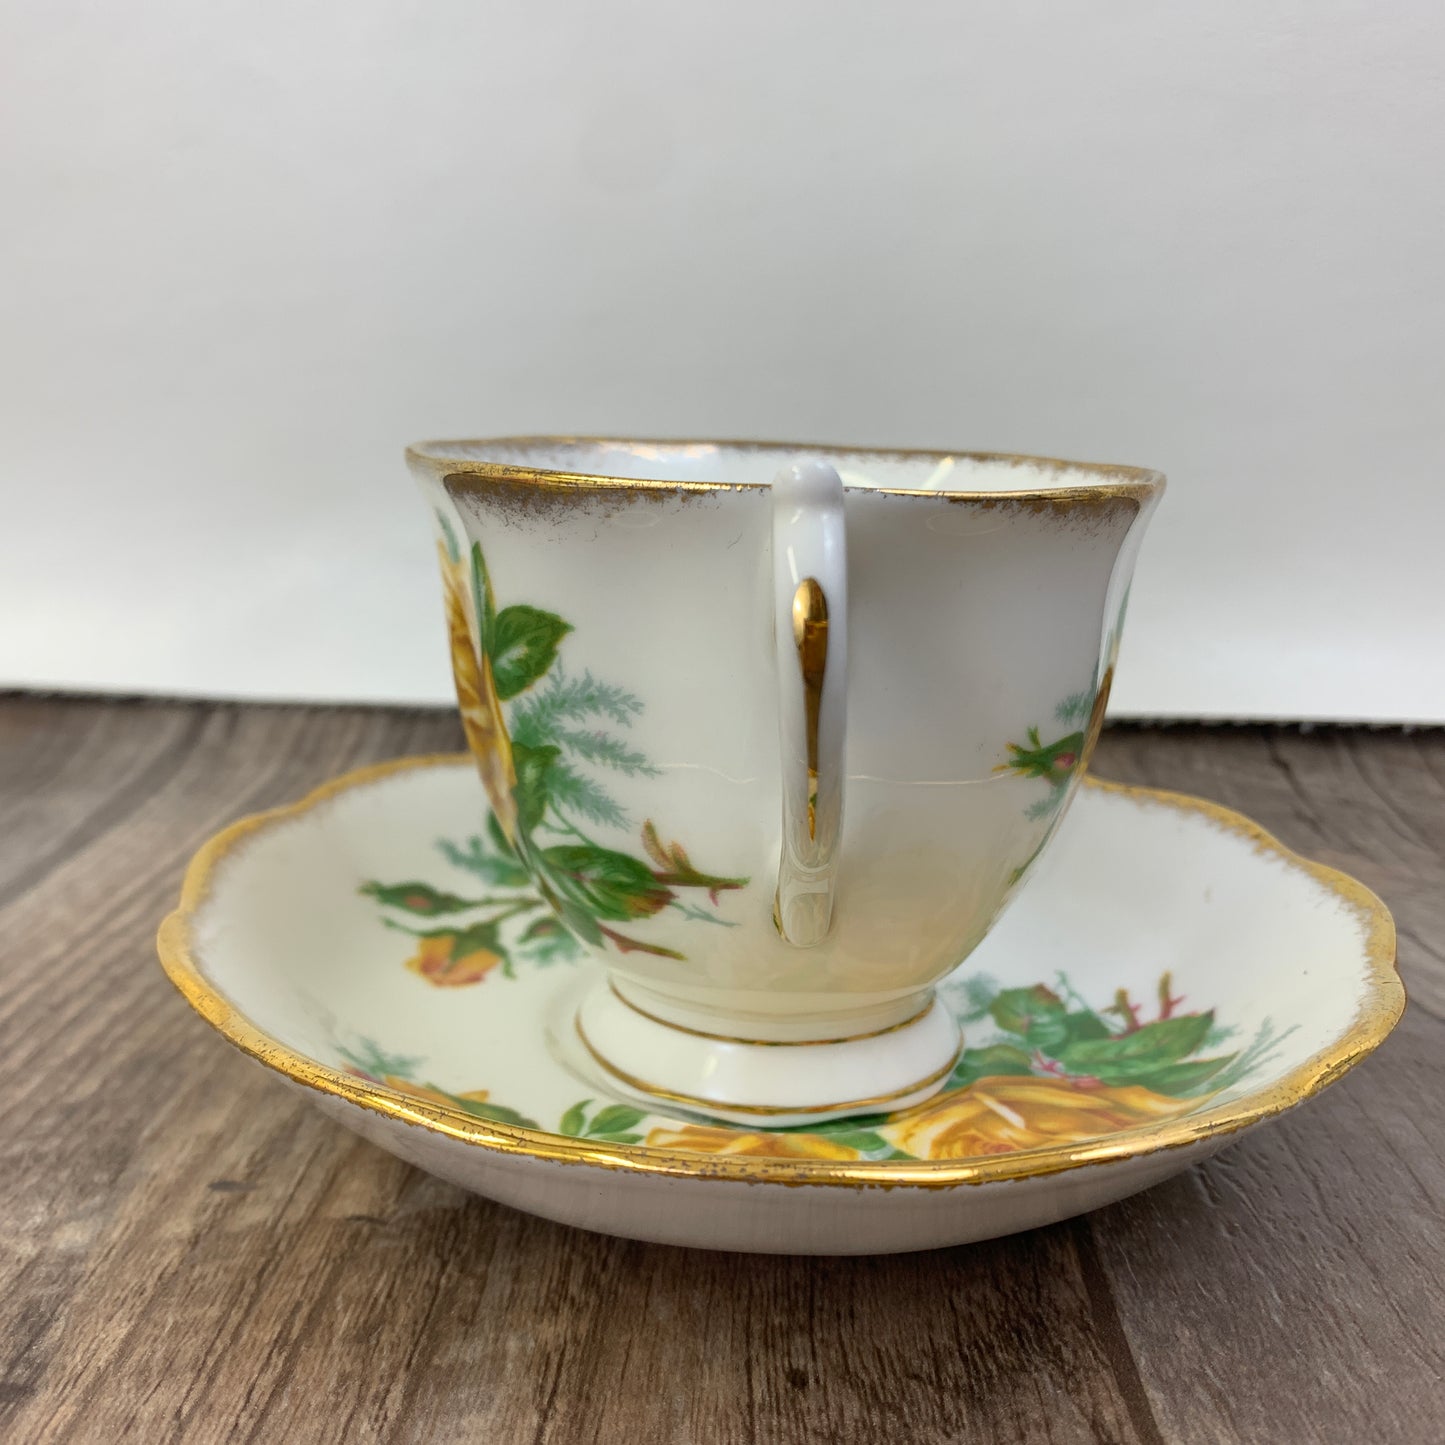 Royal Albert Tea Rose Vintage Teacup with Yellow Roses 1940s Tea Cup and Saucer Countess Shape